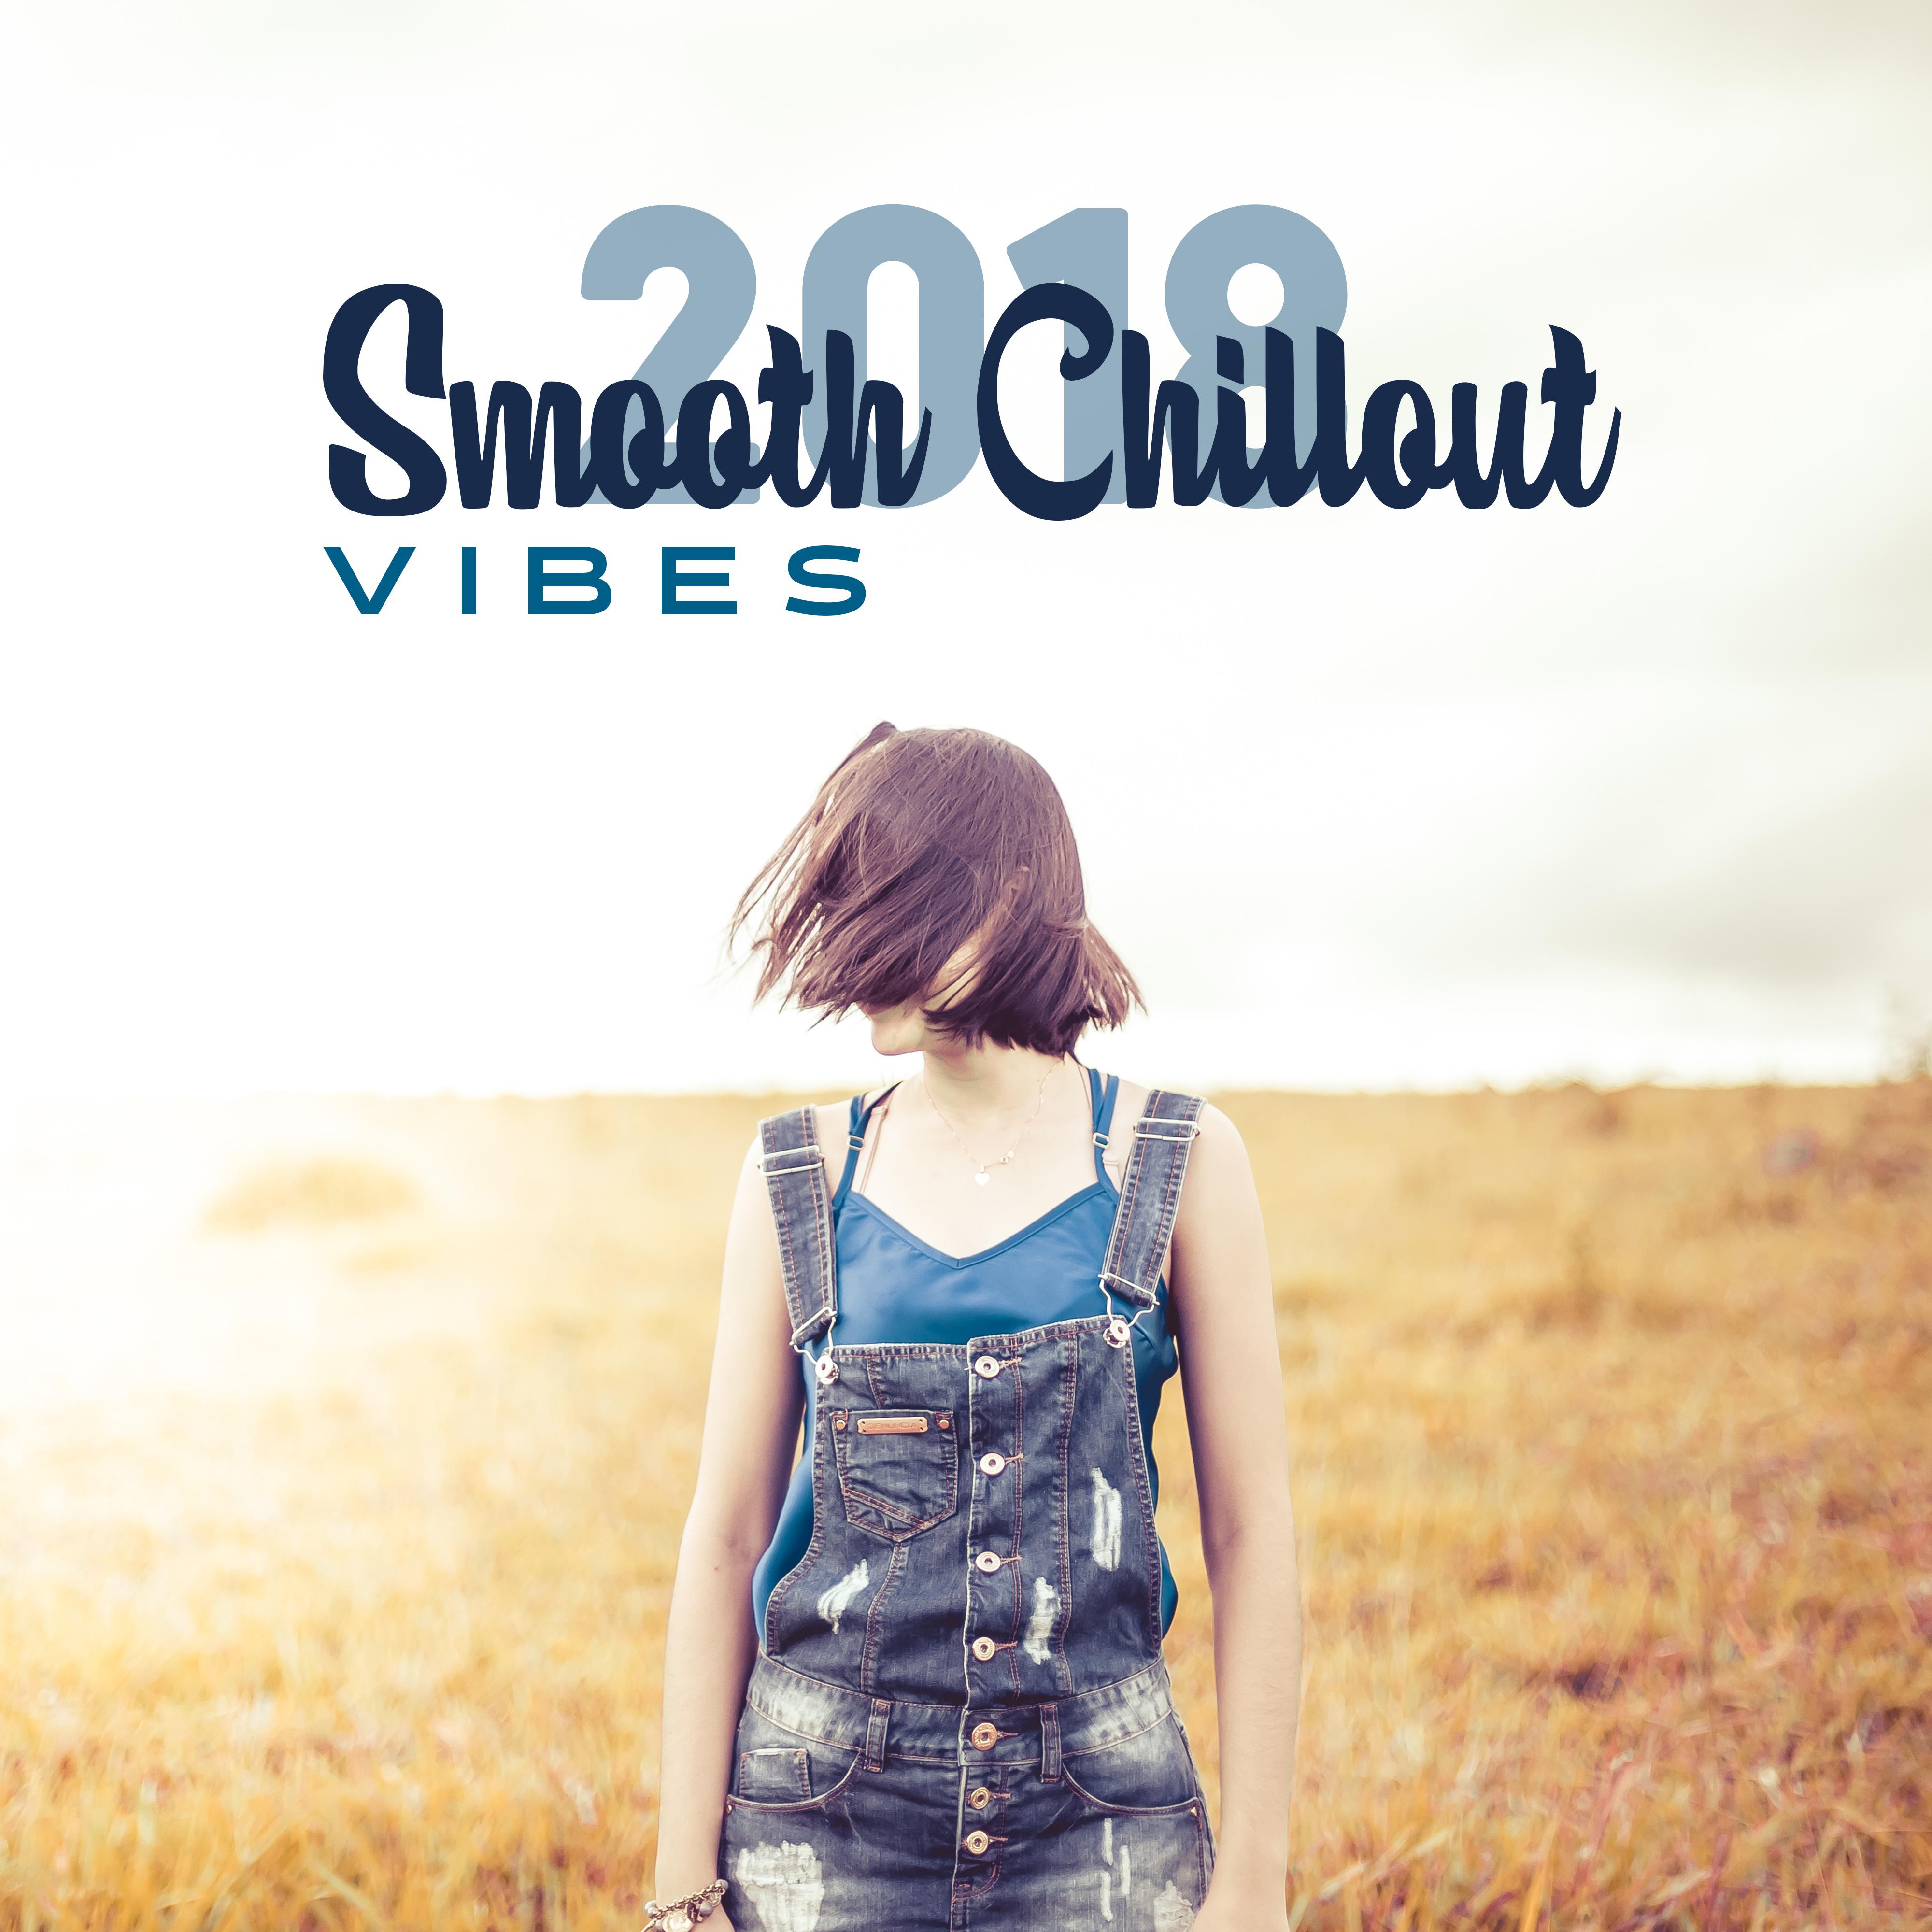 2018 Smooth Chillout Vibes